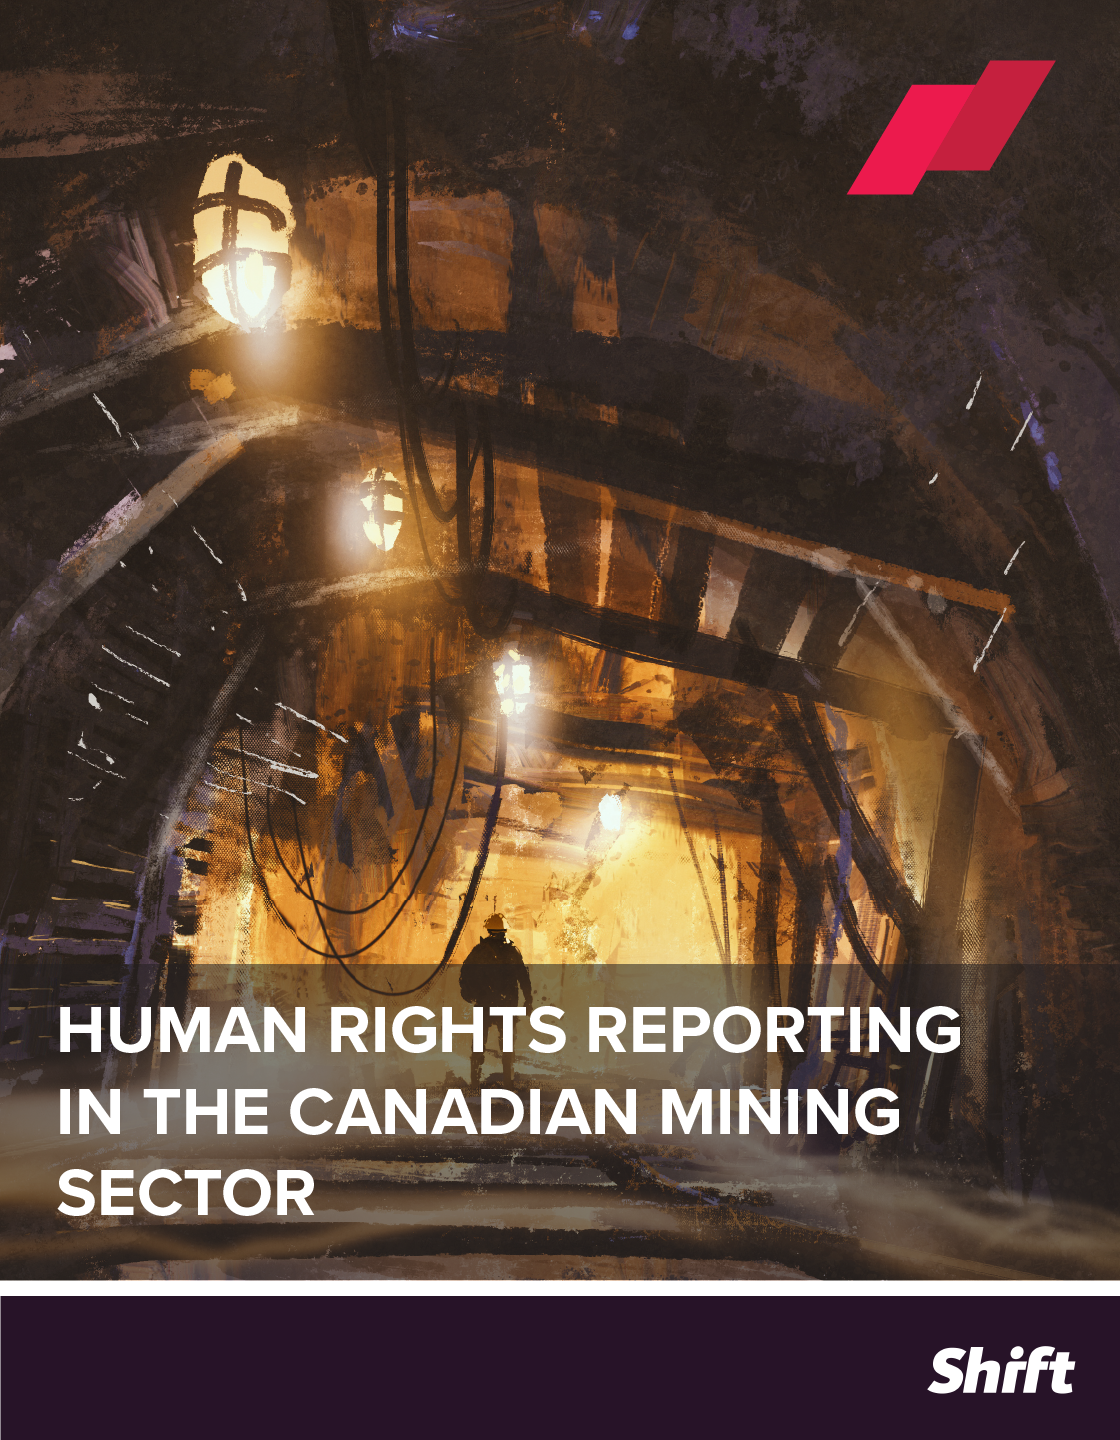 Human Rights Reporting in the Canadian Mining Sector